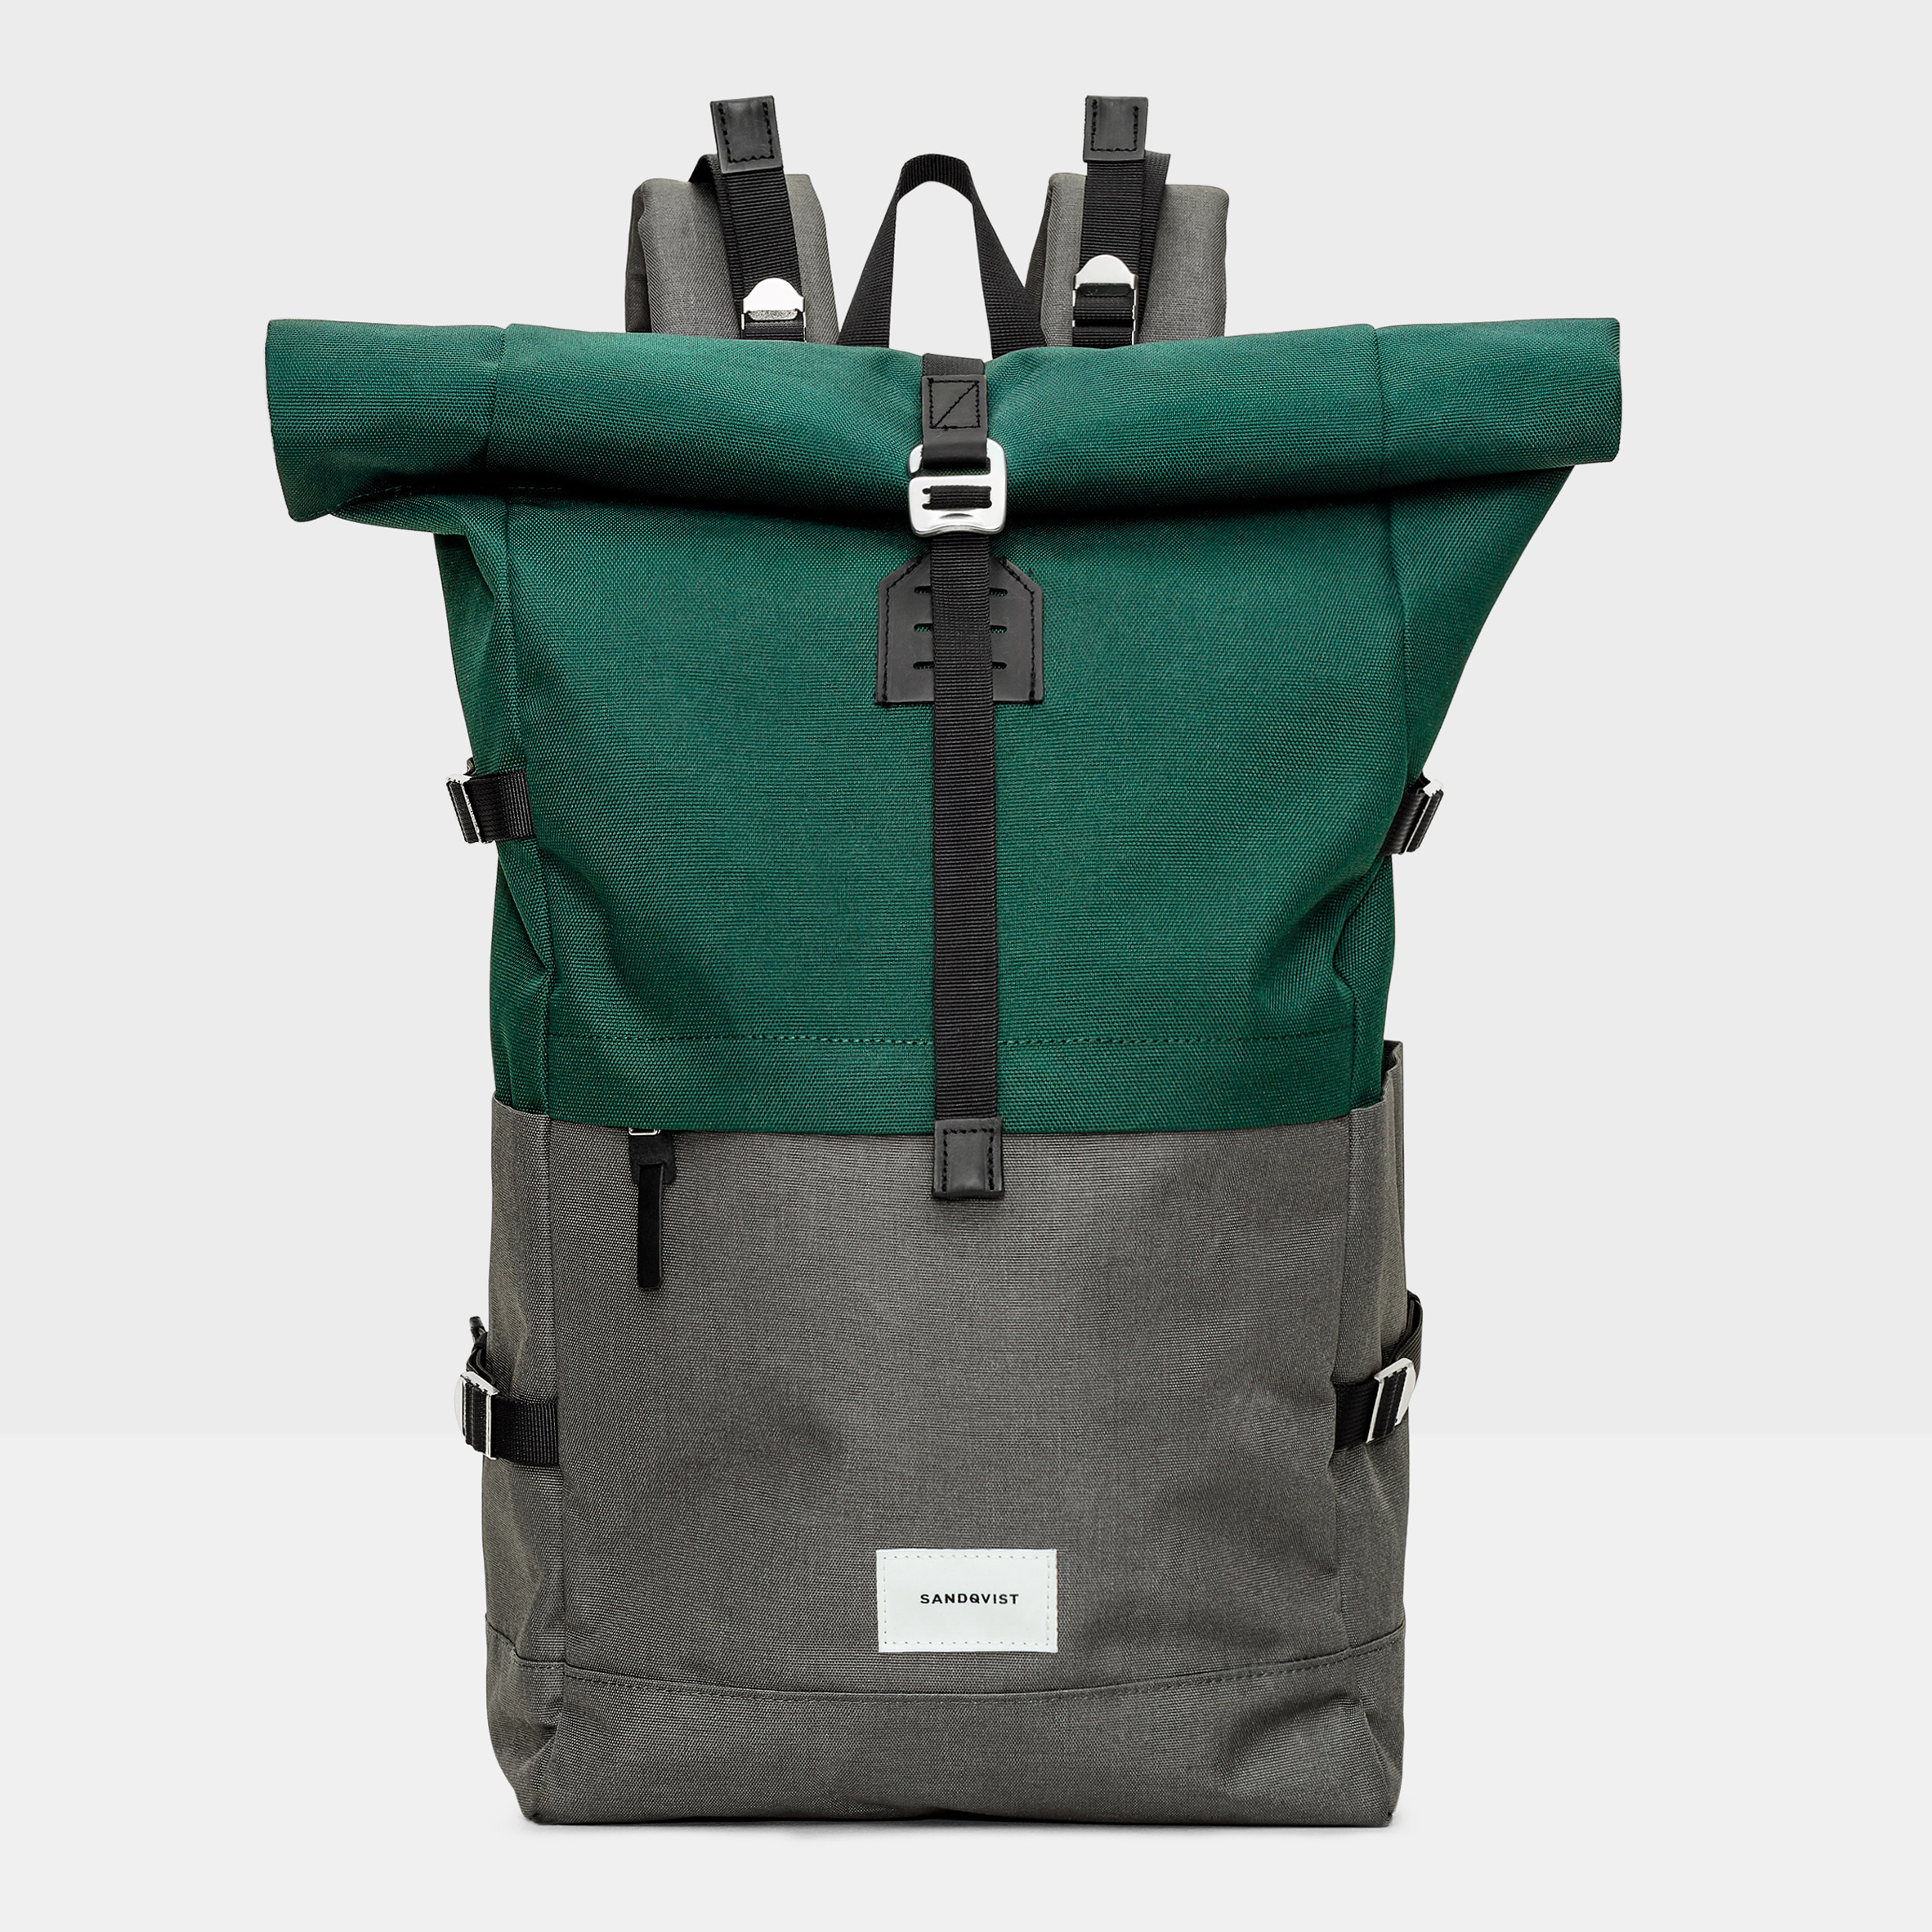 Christmas 2018 gifts for architects and designers: Backpack Bernt by Sandqvist